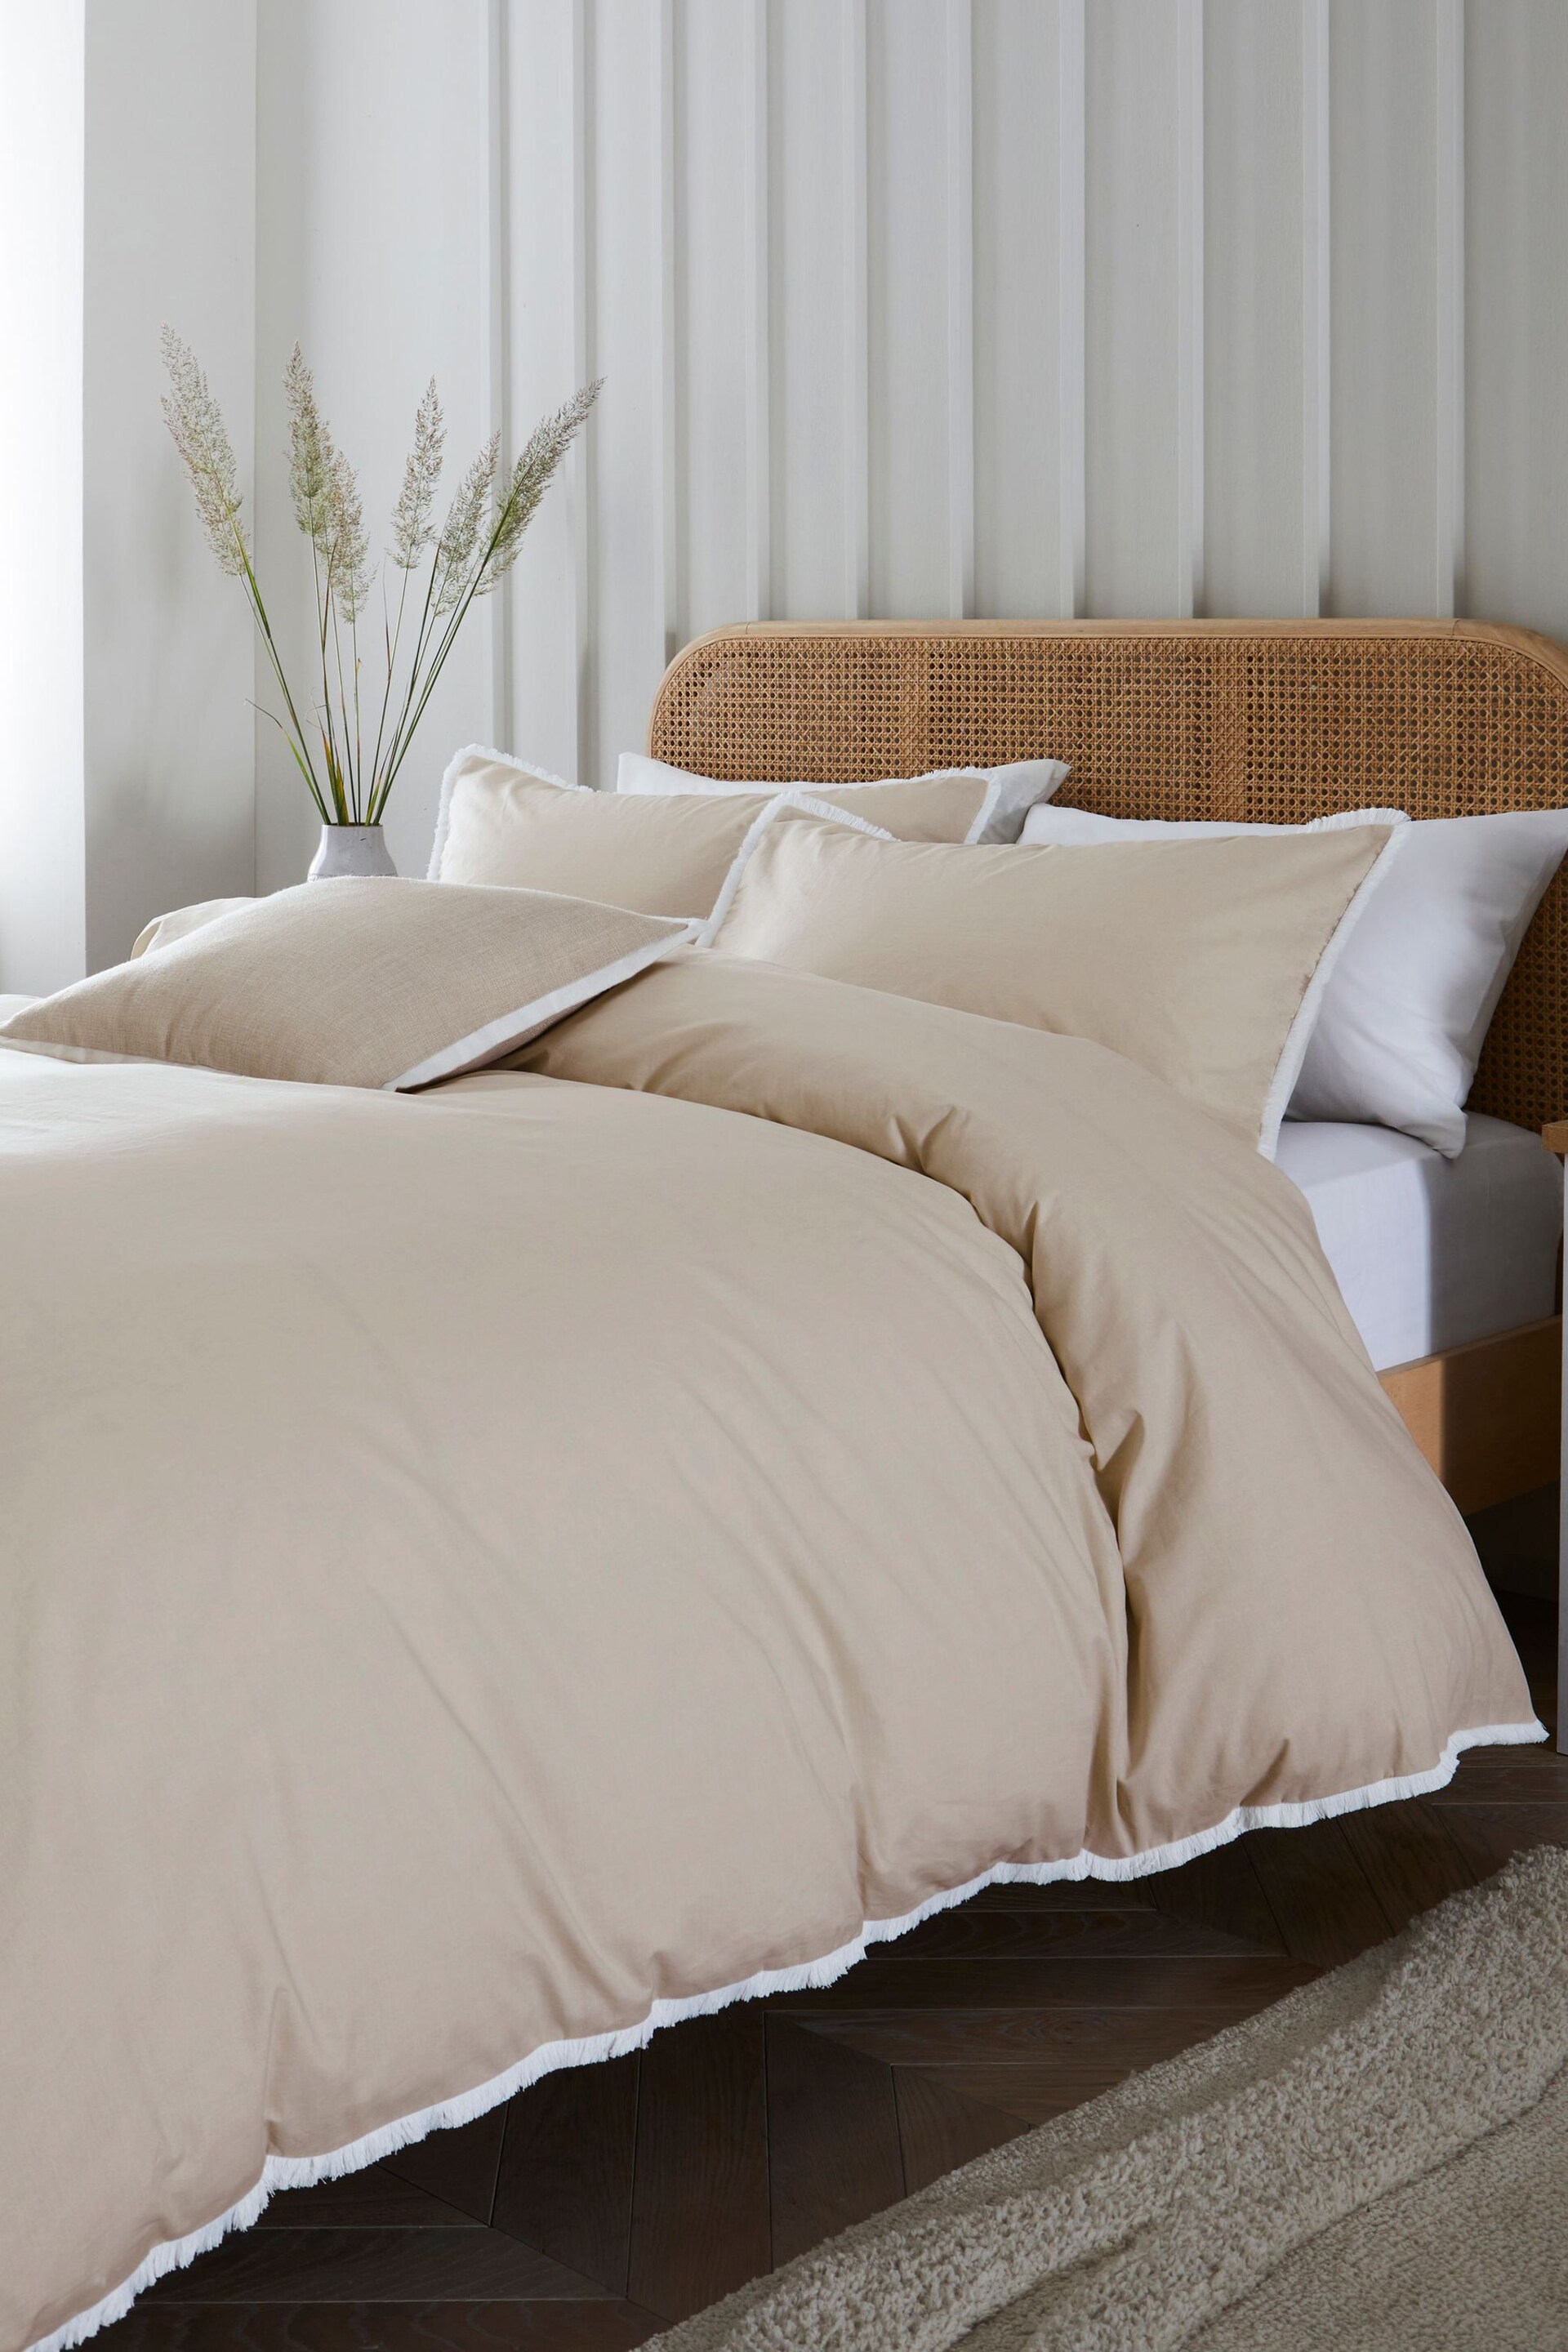 Natural Fringed Edge 100% Cotton Duvet Cover and Pillowcase Set - Image 1 of 5